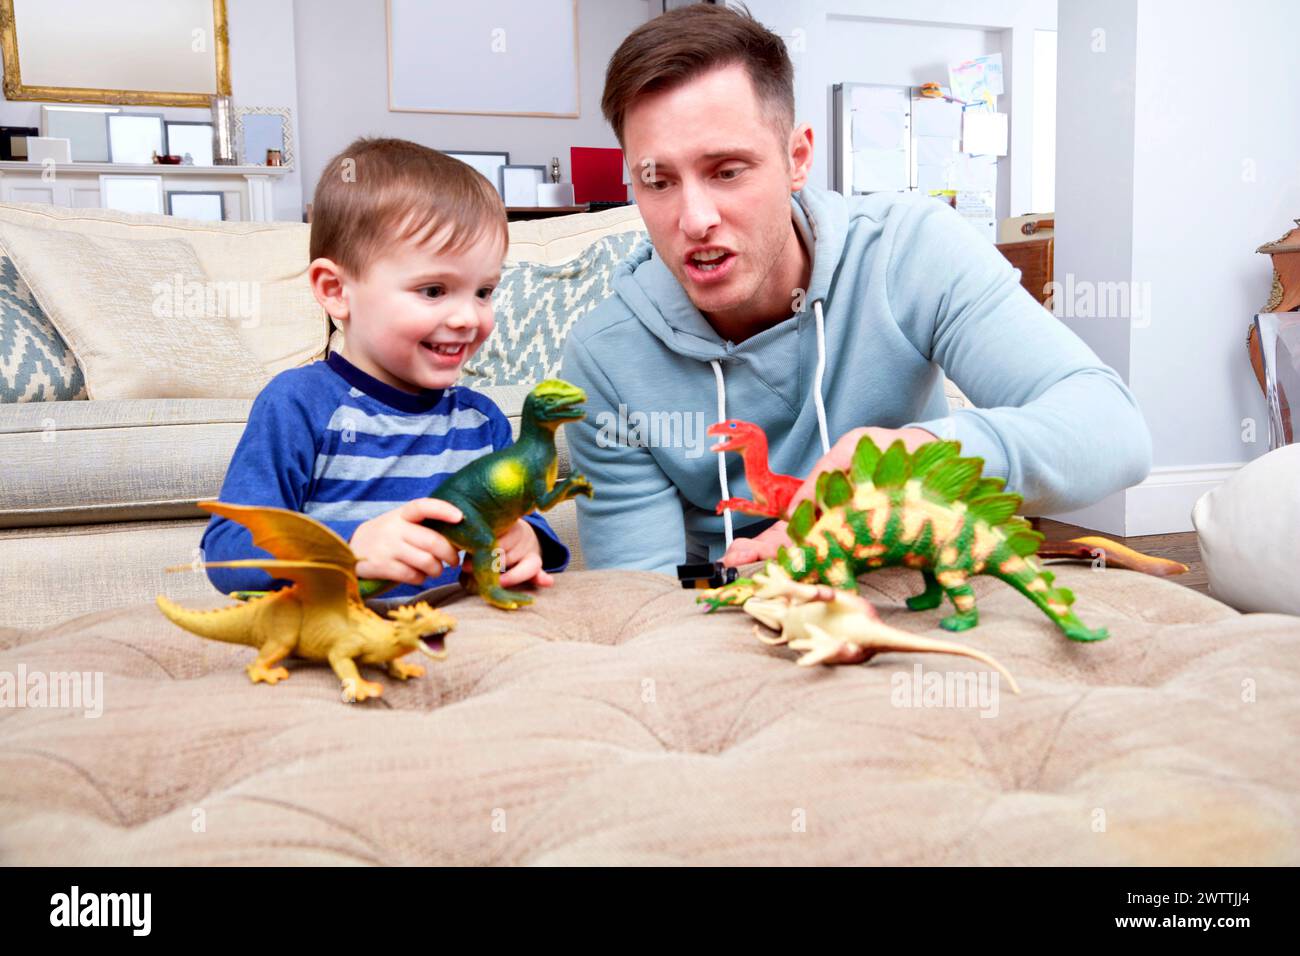 Adult and child playing with dinosaur toys on a sofa Stock Photo